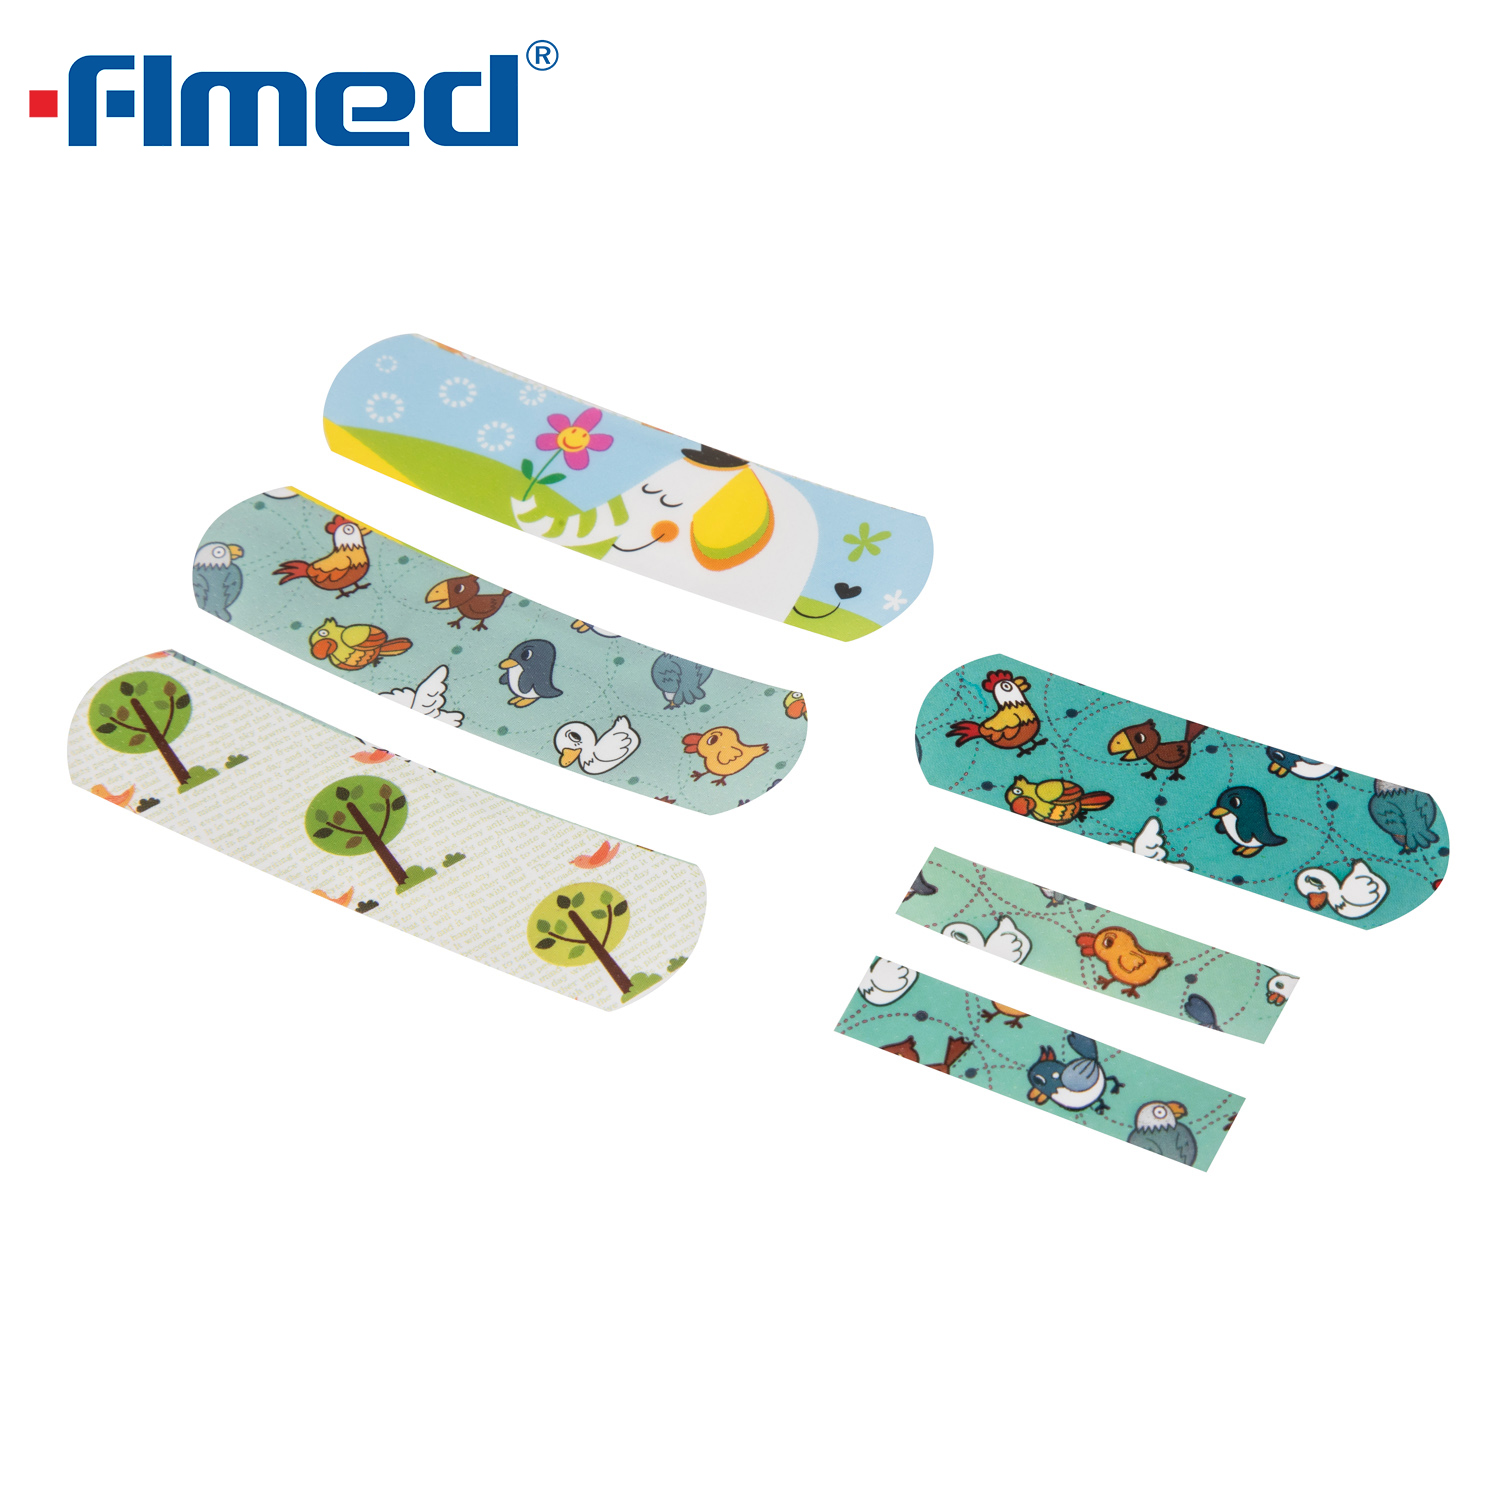 Wound Plaster Adhesive Bandages Character Bandaids & Bandages for Kids 